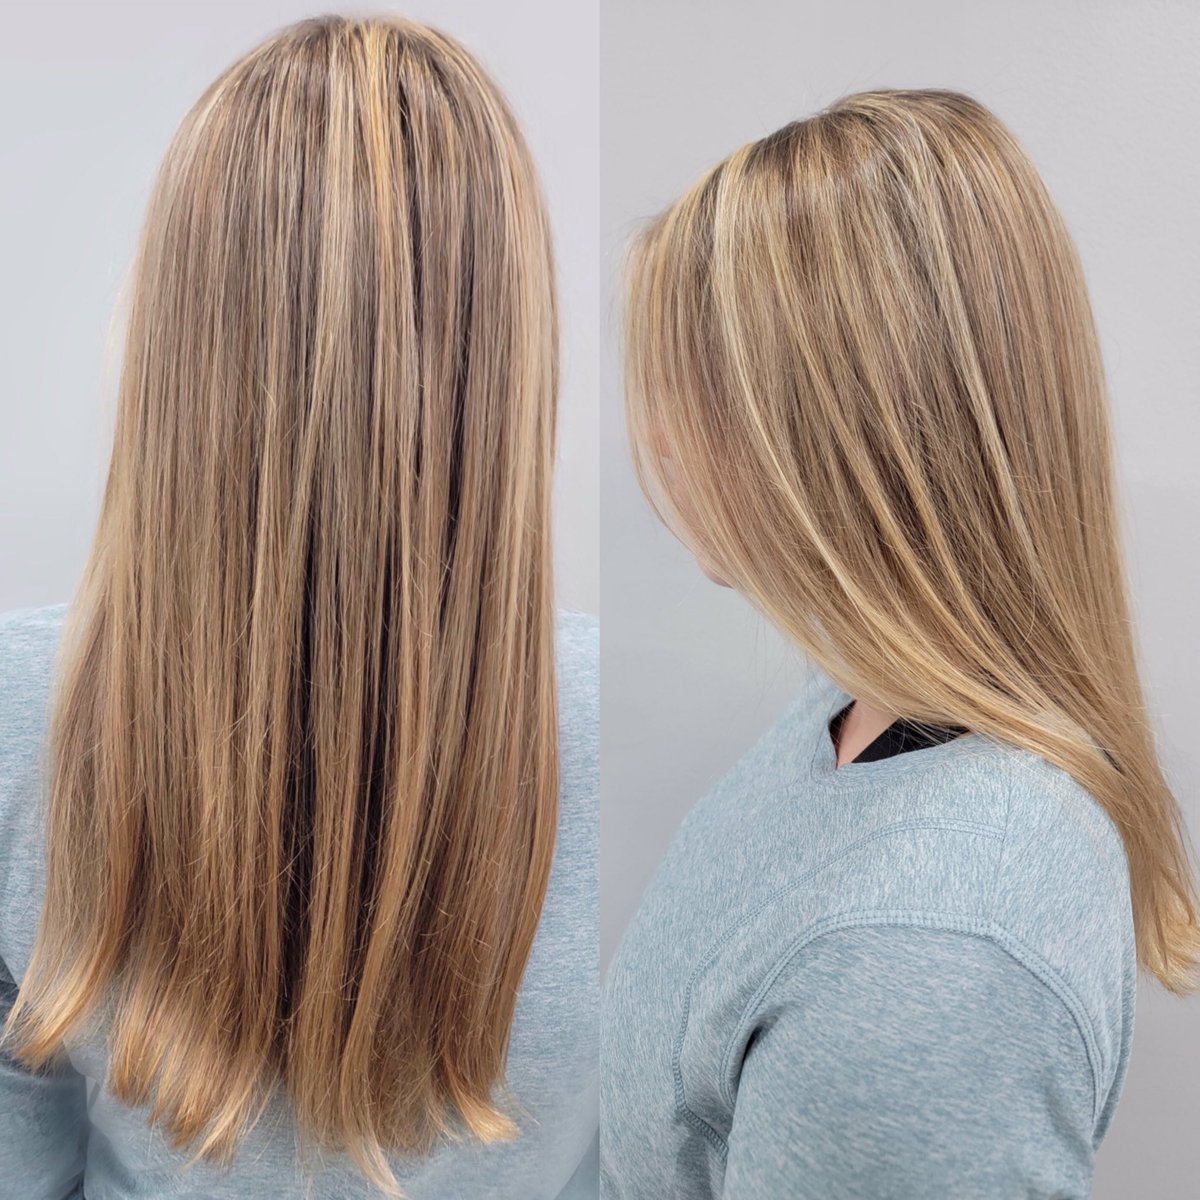 Partial highlight done by our stylist Jessica 🤩❤️ #junkohairstudio #partialhighlights #highlights #explorepage #fyp #atlhairstylist